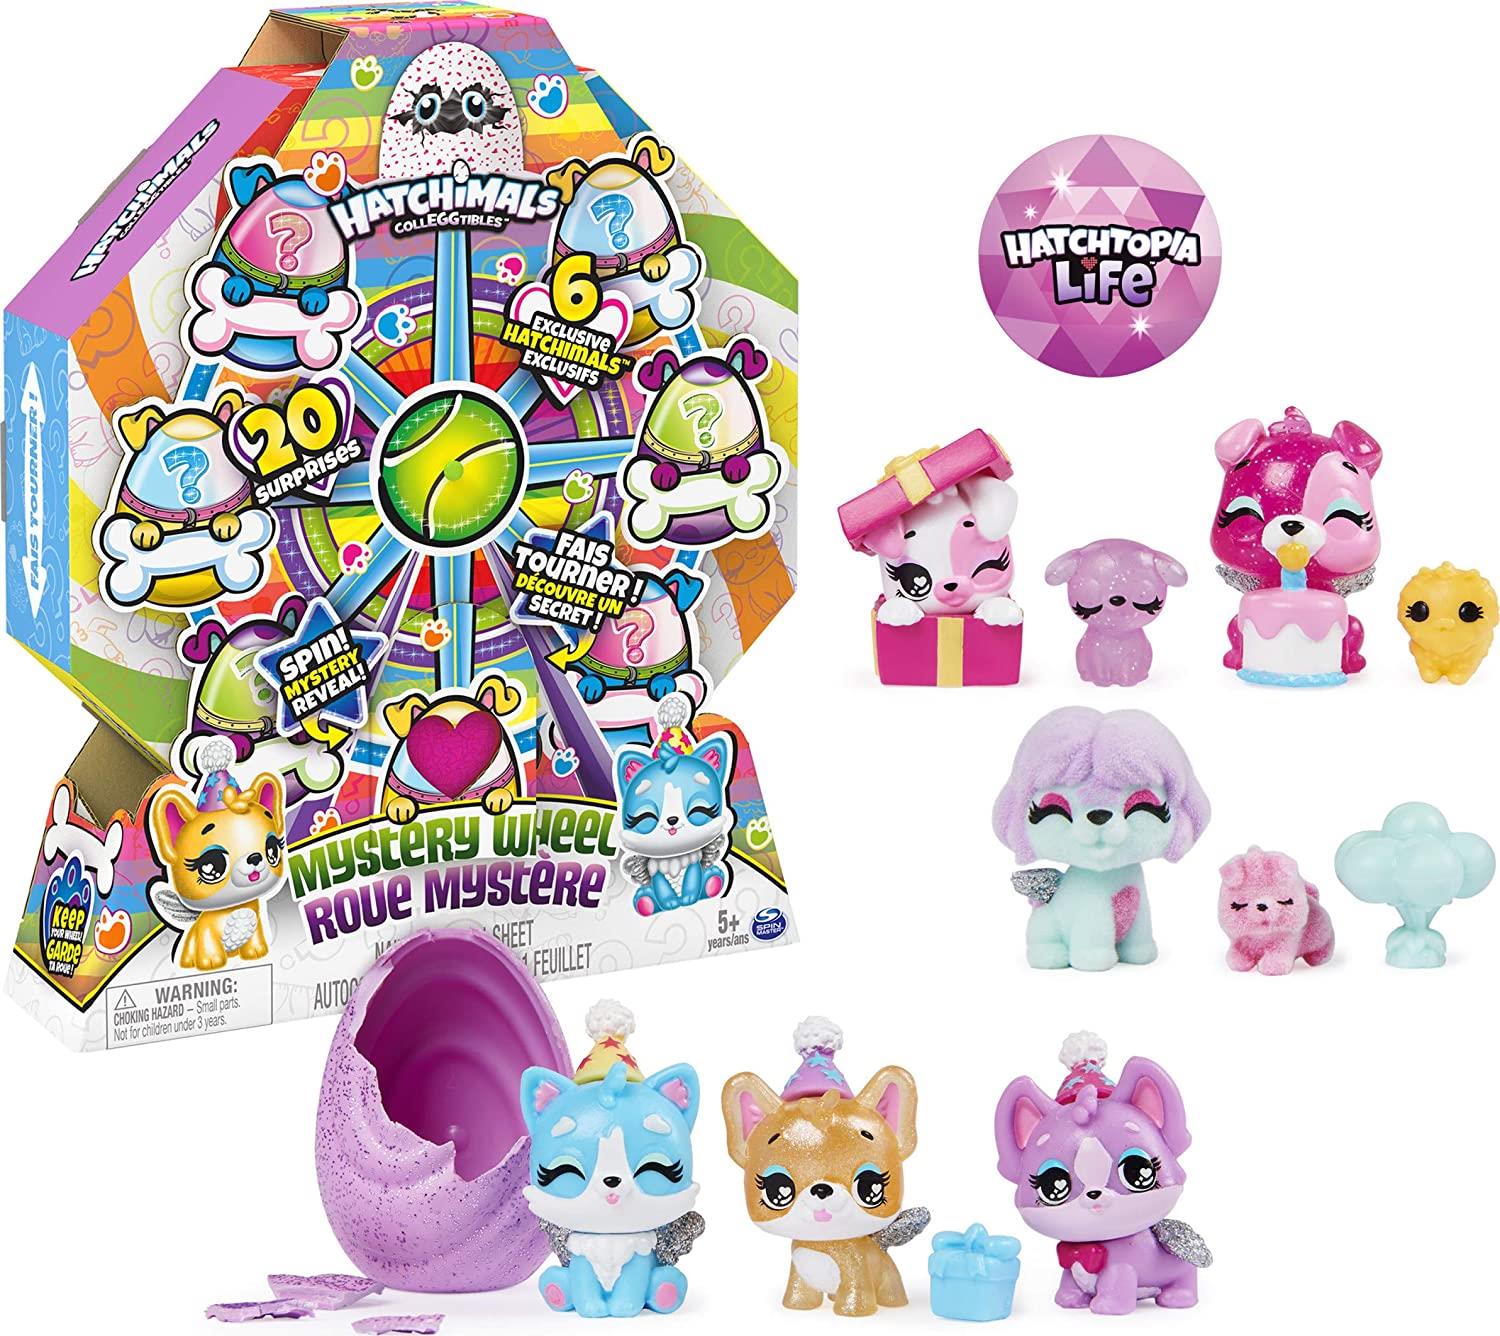 Hatchimals CollEGGtibles Puppy Party Mystery Wheel 6059963 - Maqio